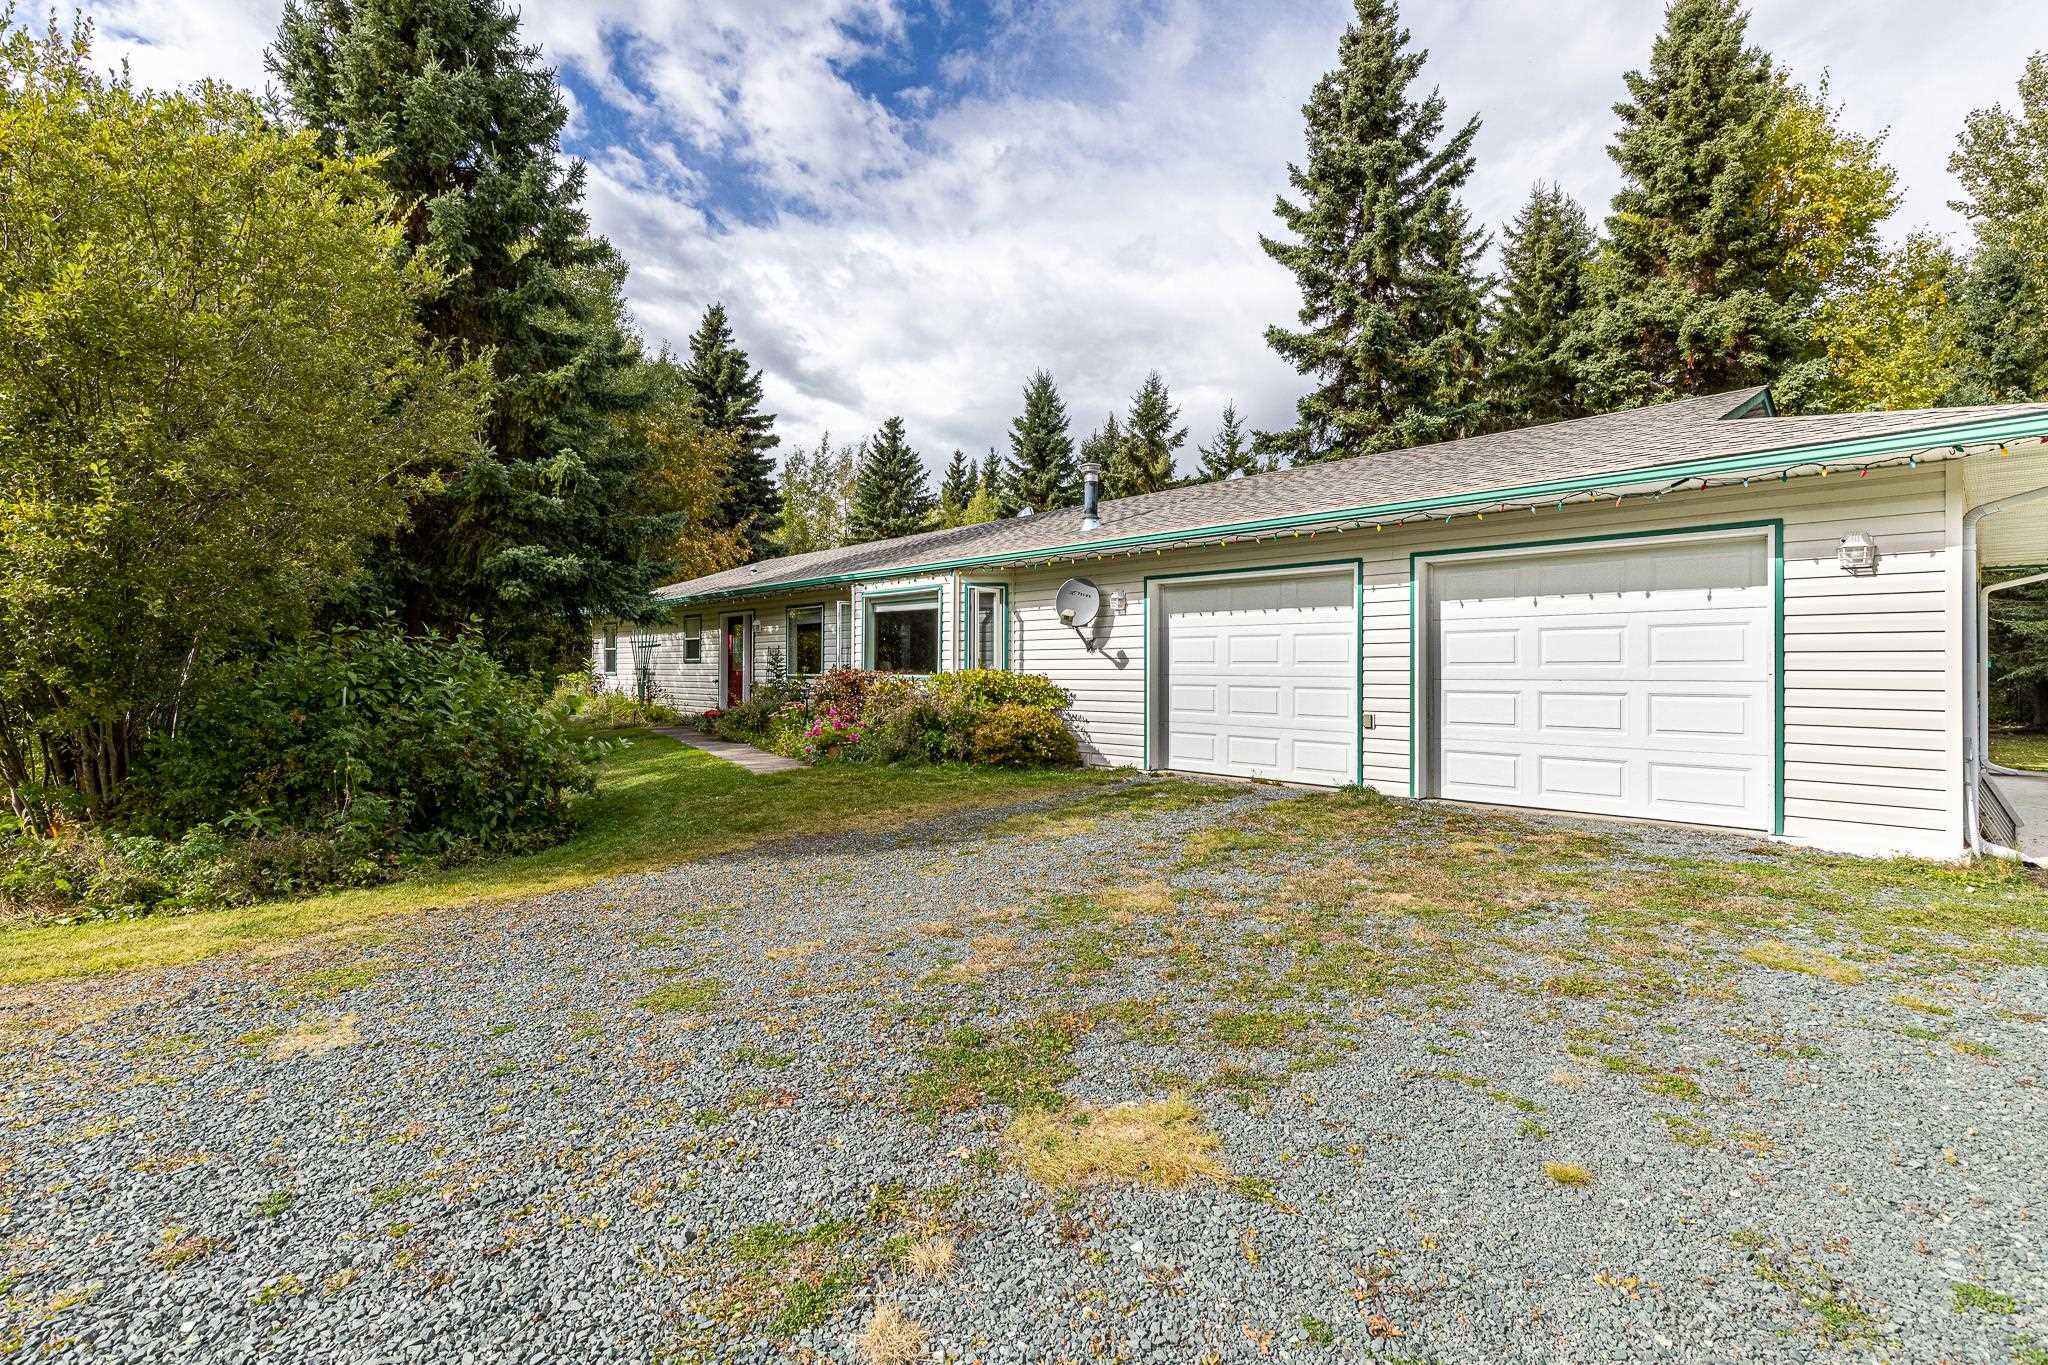 New property listed in Beaverley, PG Rural West (Zone 77)